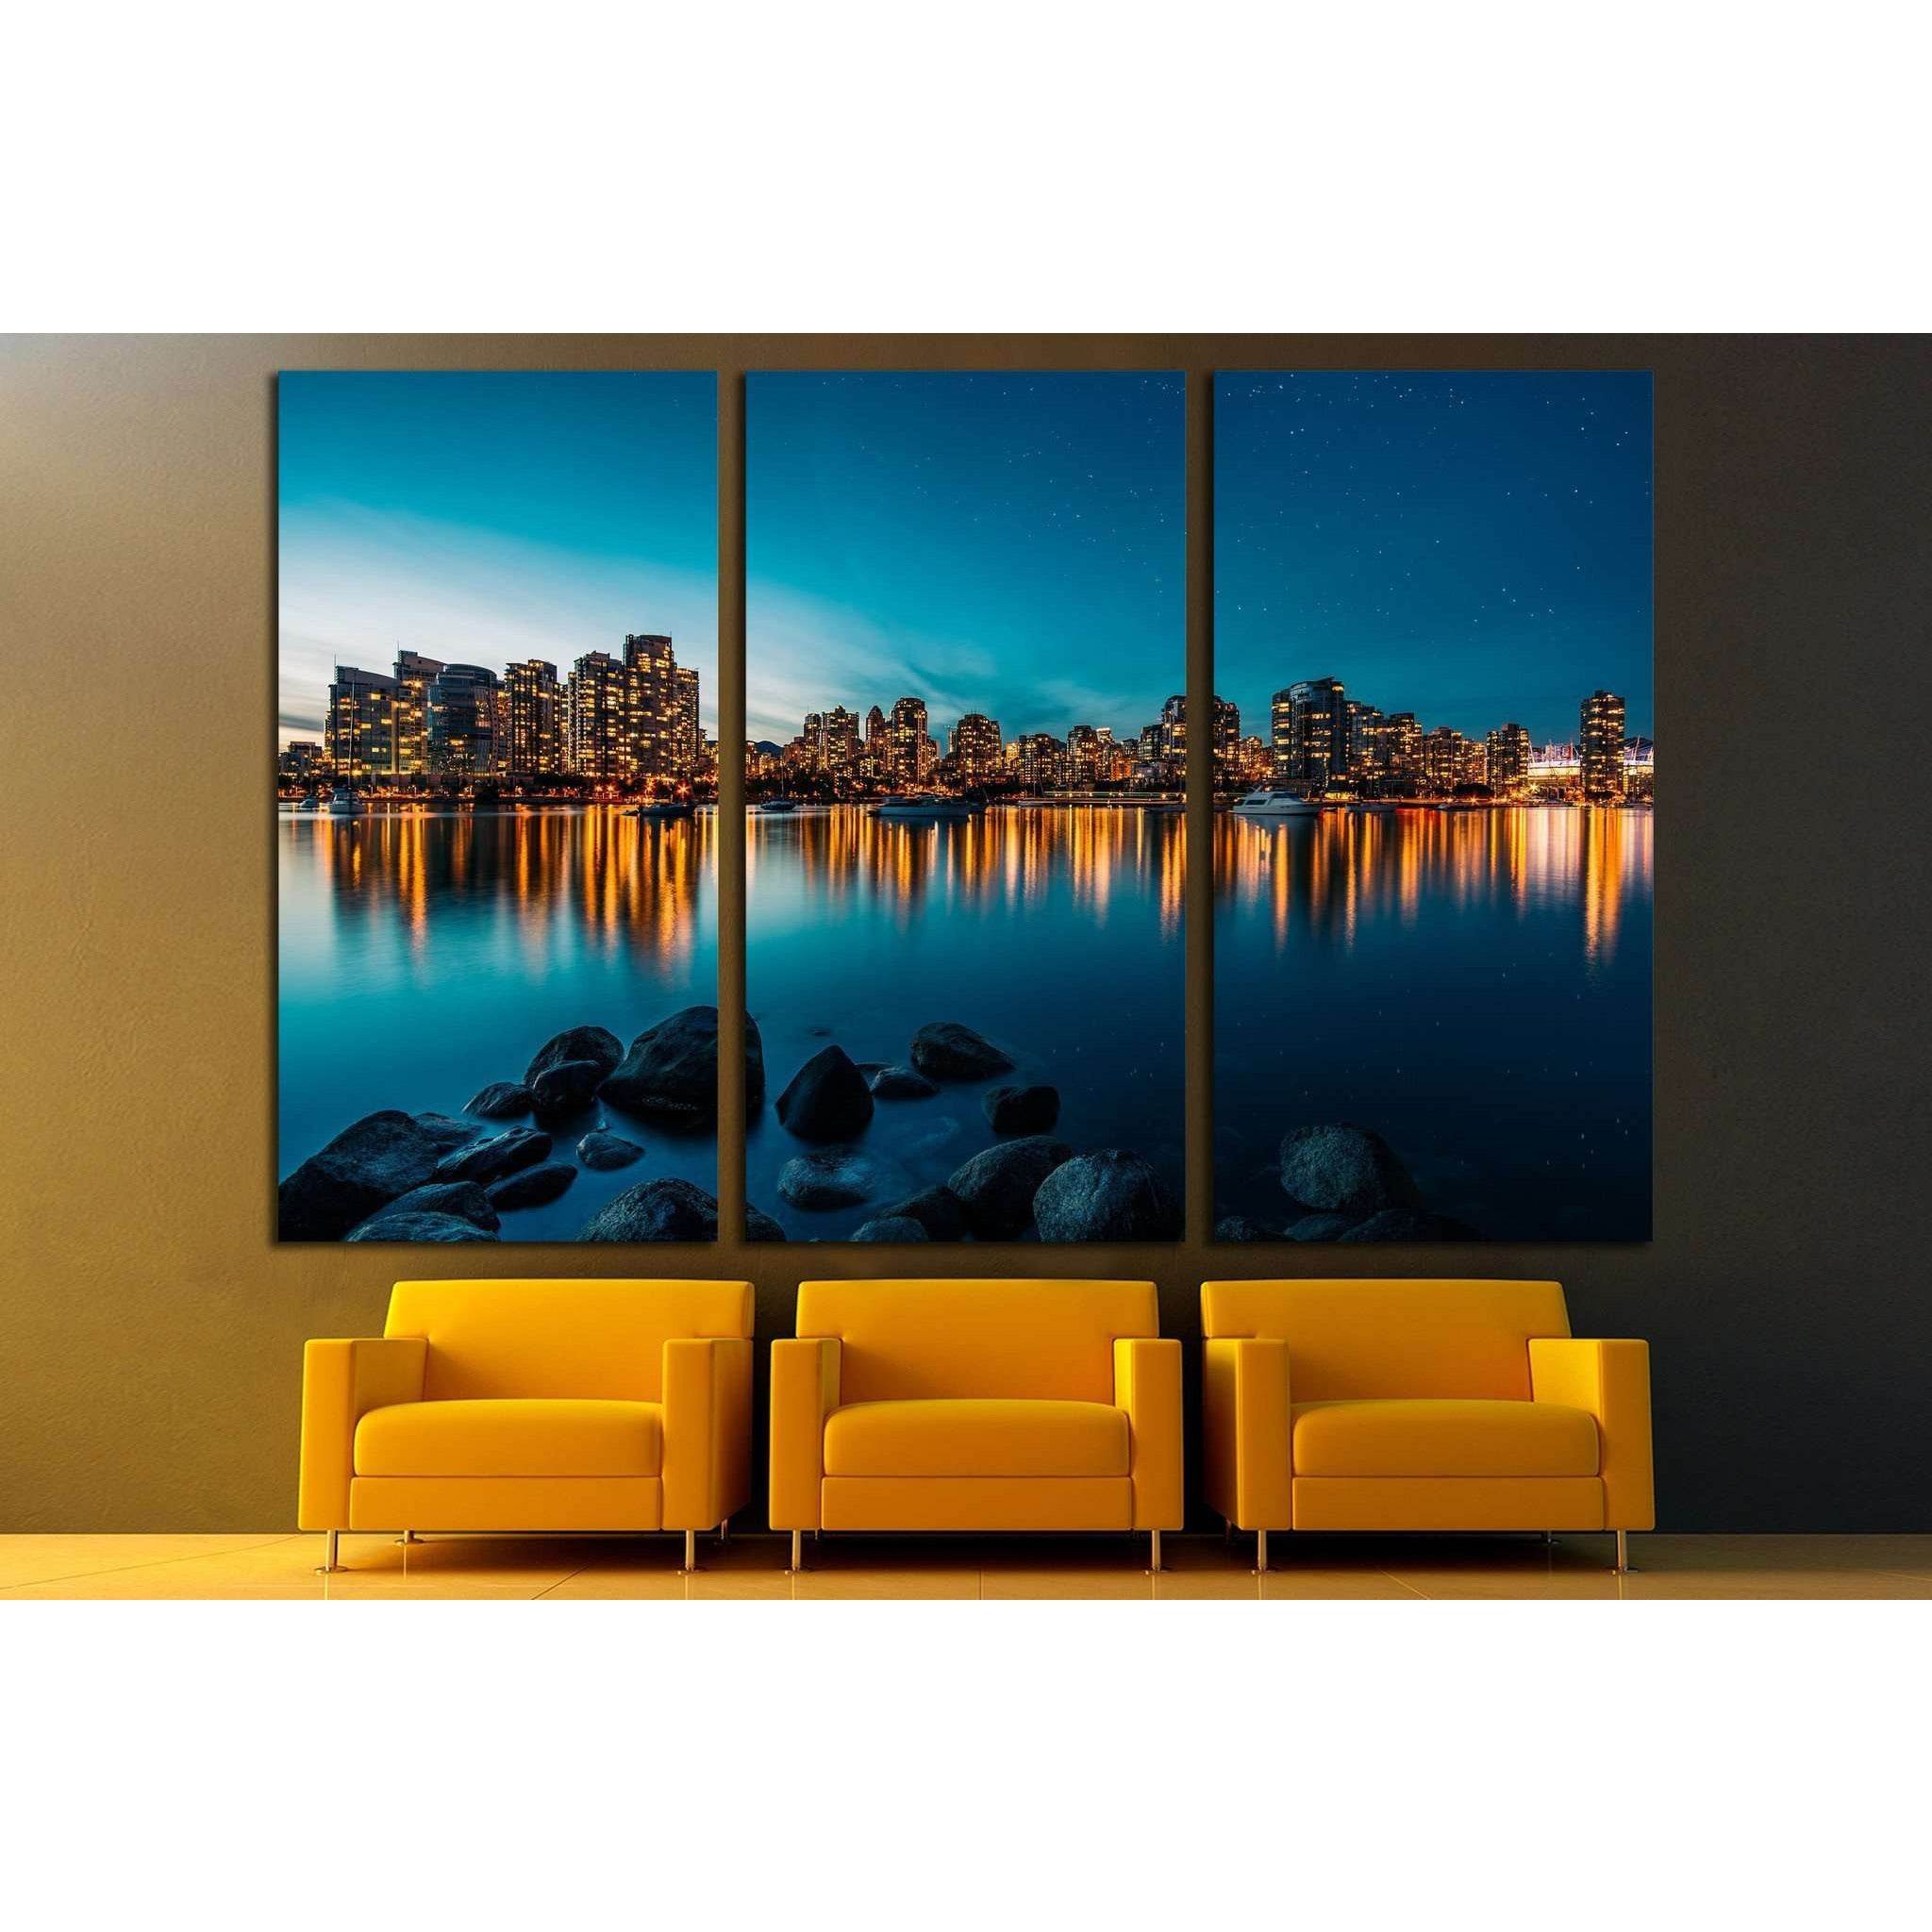 Vancouver skyline reflection at sunset №2023 Ready to Hang Canvas Print